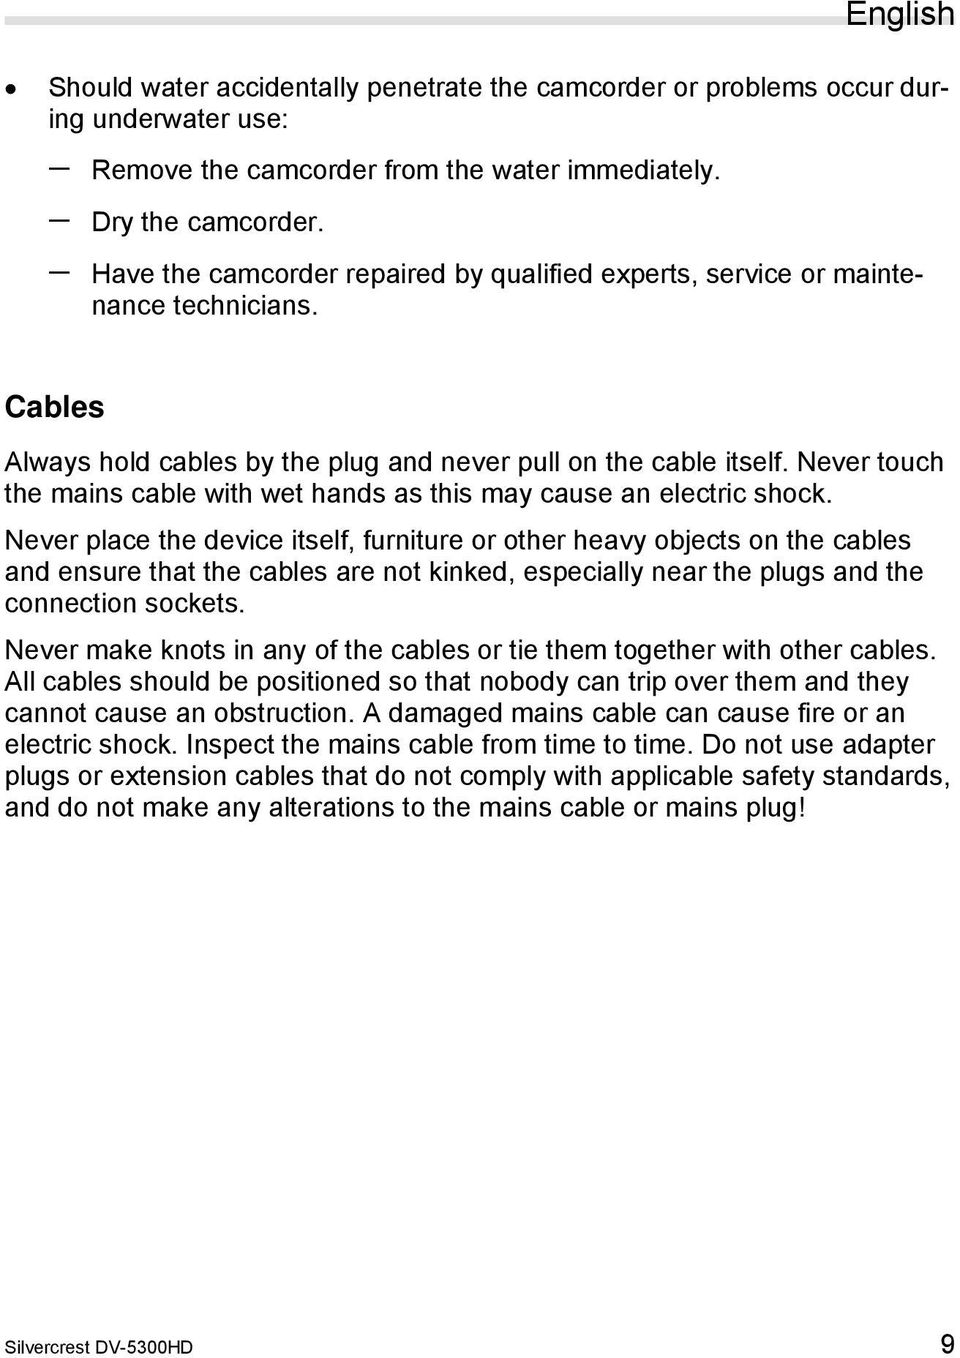 Never touch the mains cable with wet hands as this may cause an electric shock.